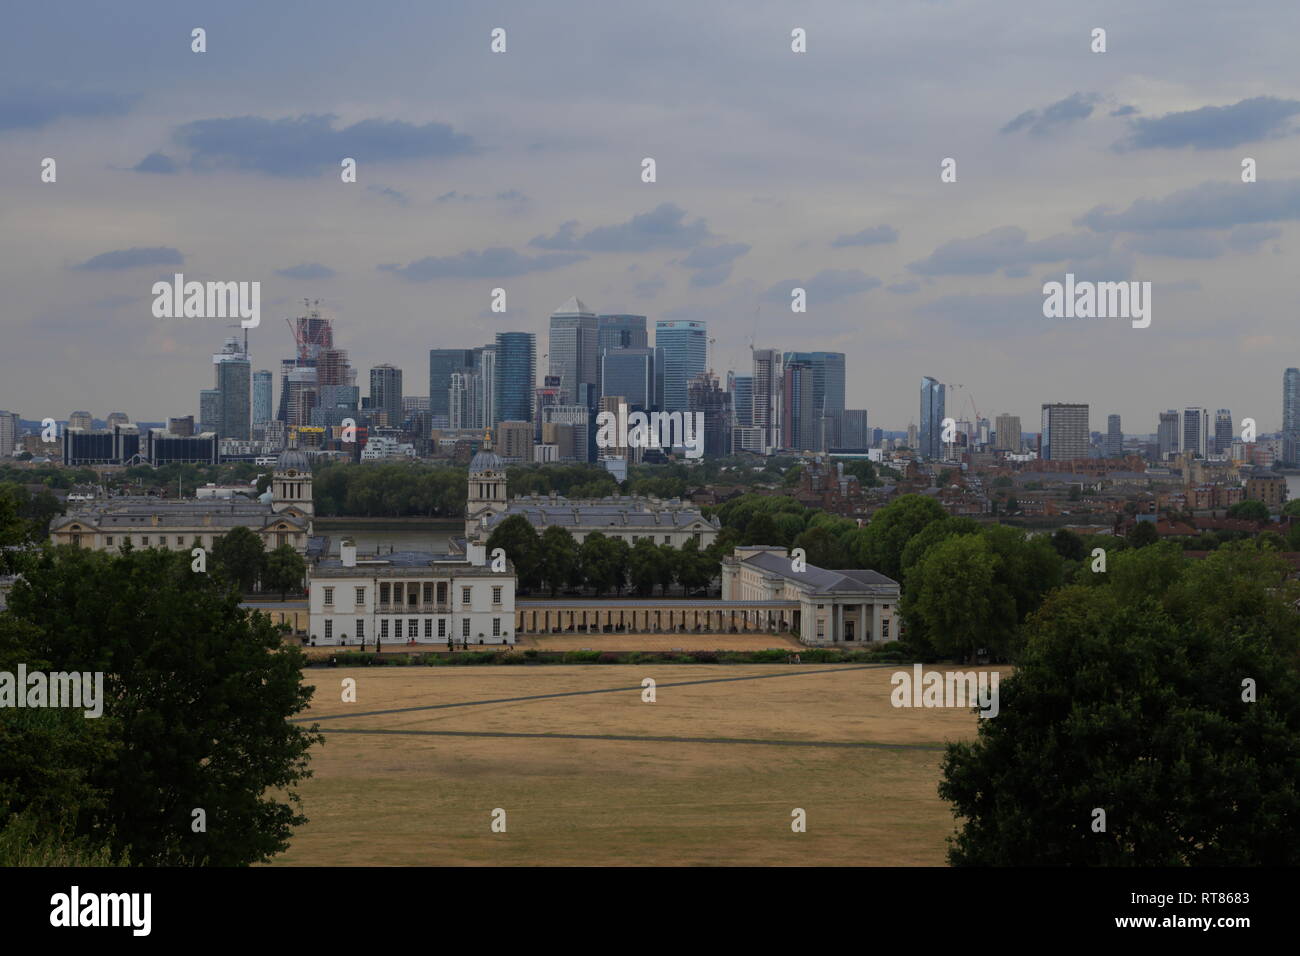 The historical Old Royal Naval College and other modern buildings make up London city skyline as seen from Greenwich in London, United Kingdom. Stock Photo